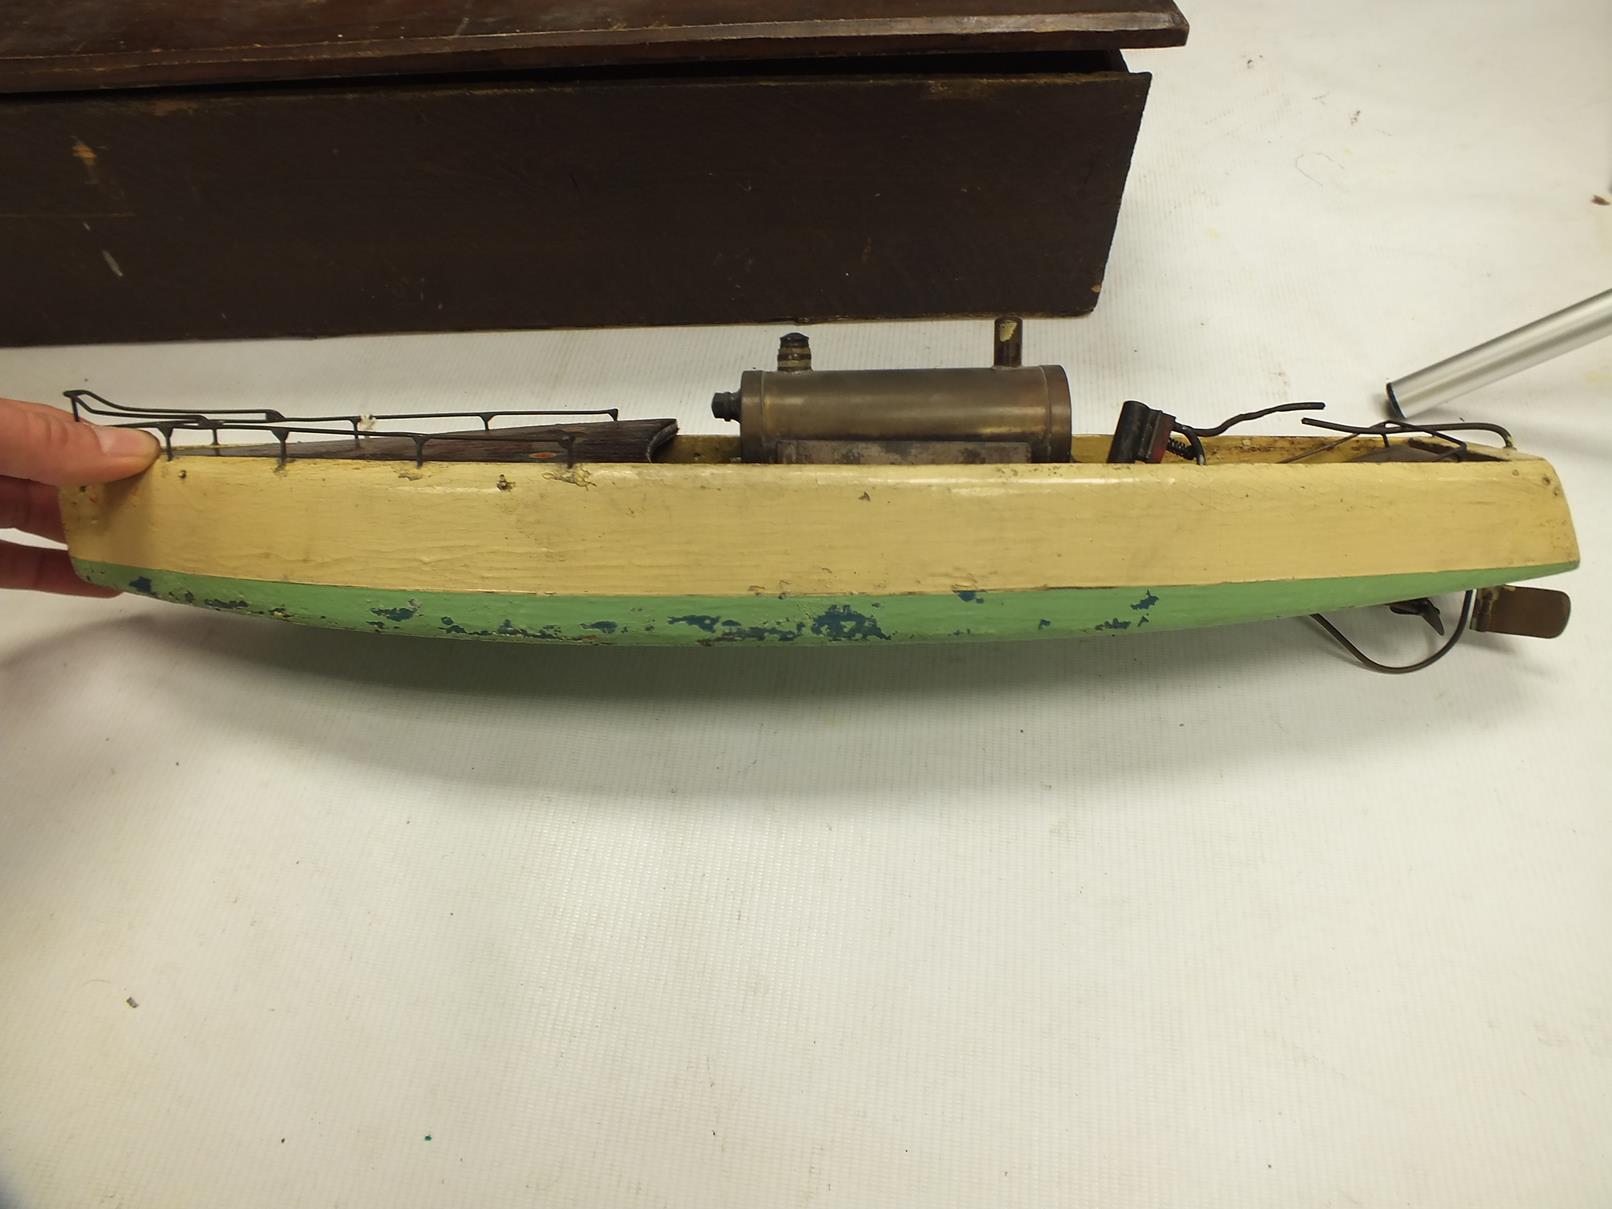 A BOWMAN HOBBIES STEAM SPEEDBOAT "SNIPE", with steam mechanism, the hull painted cream and green ( - Image 9 of 10